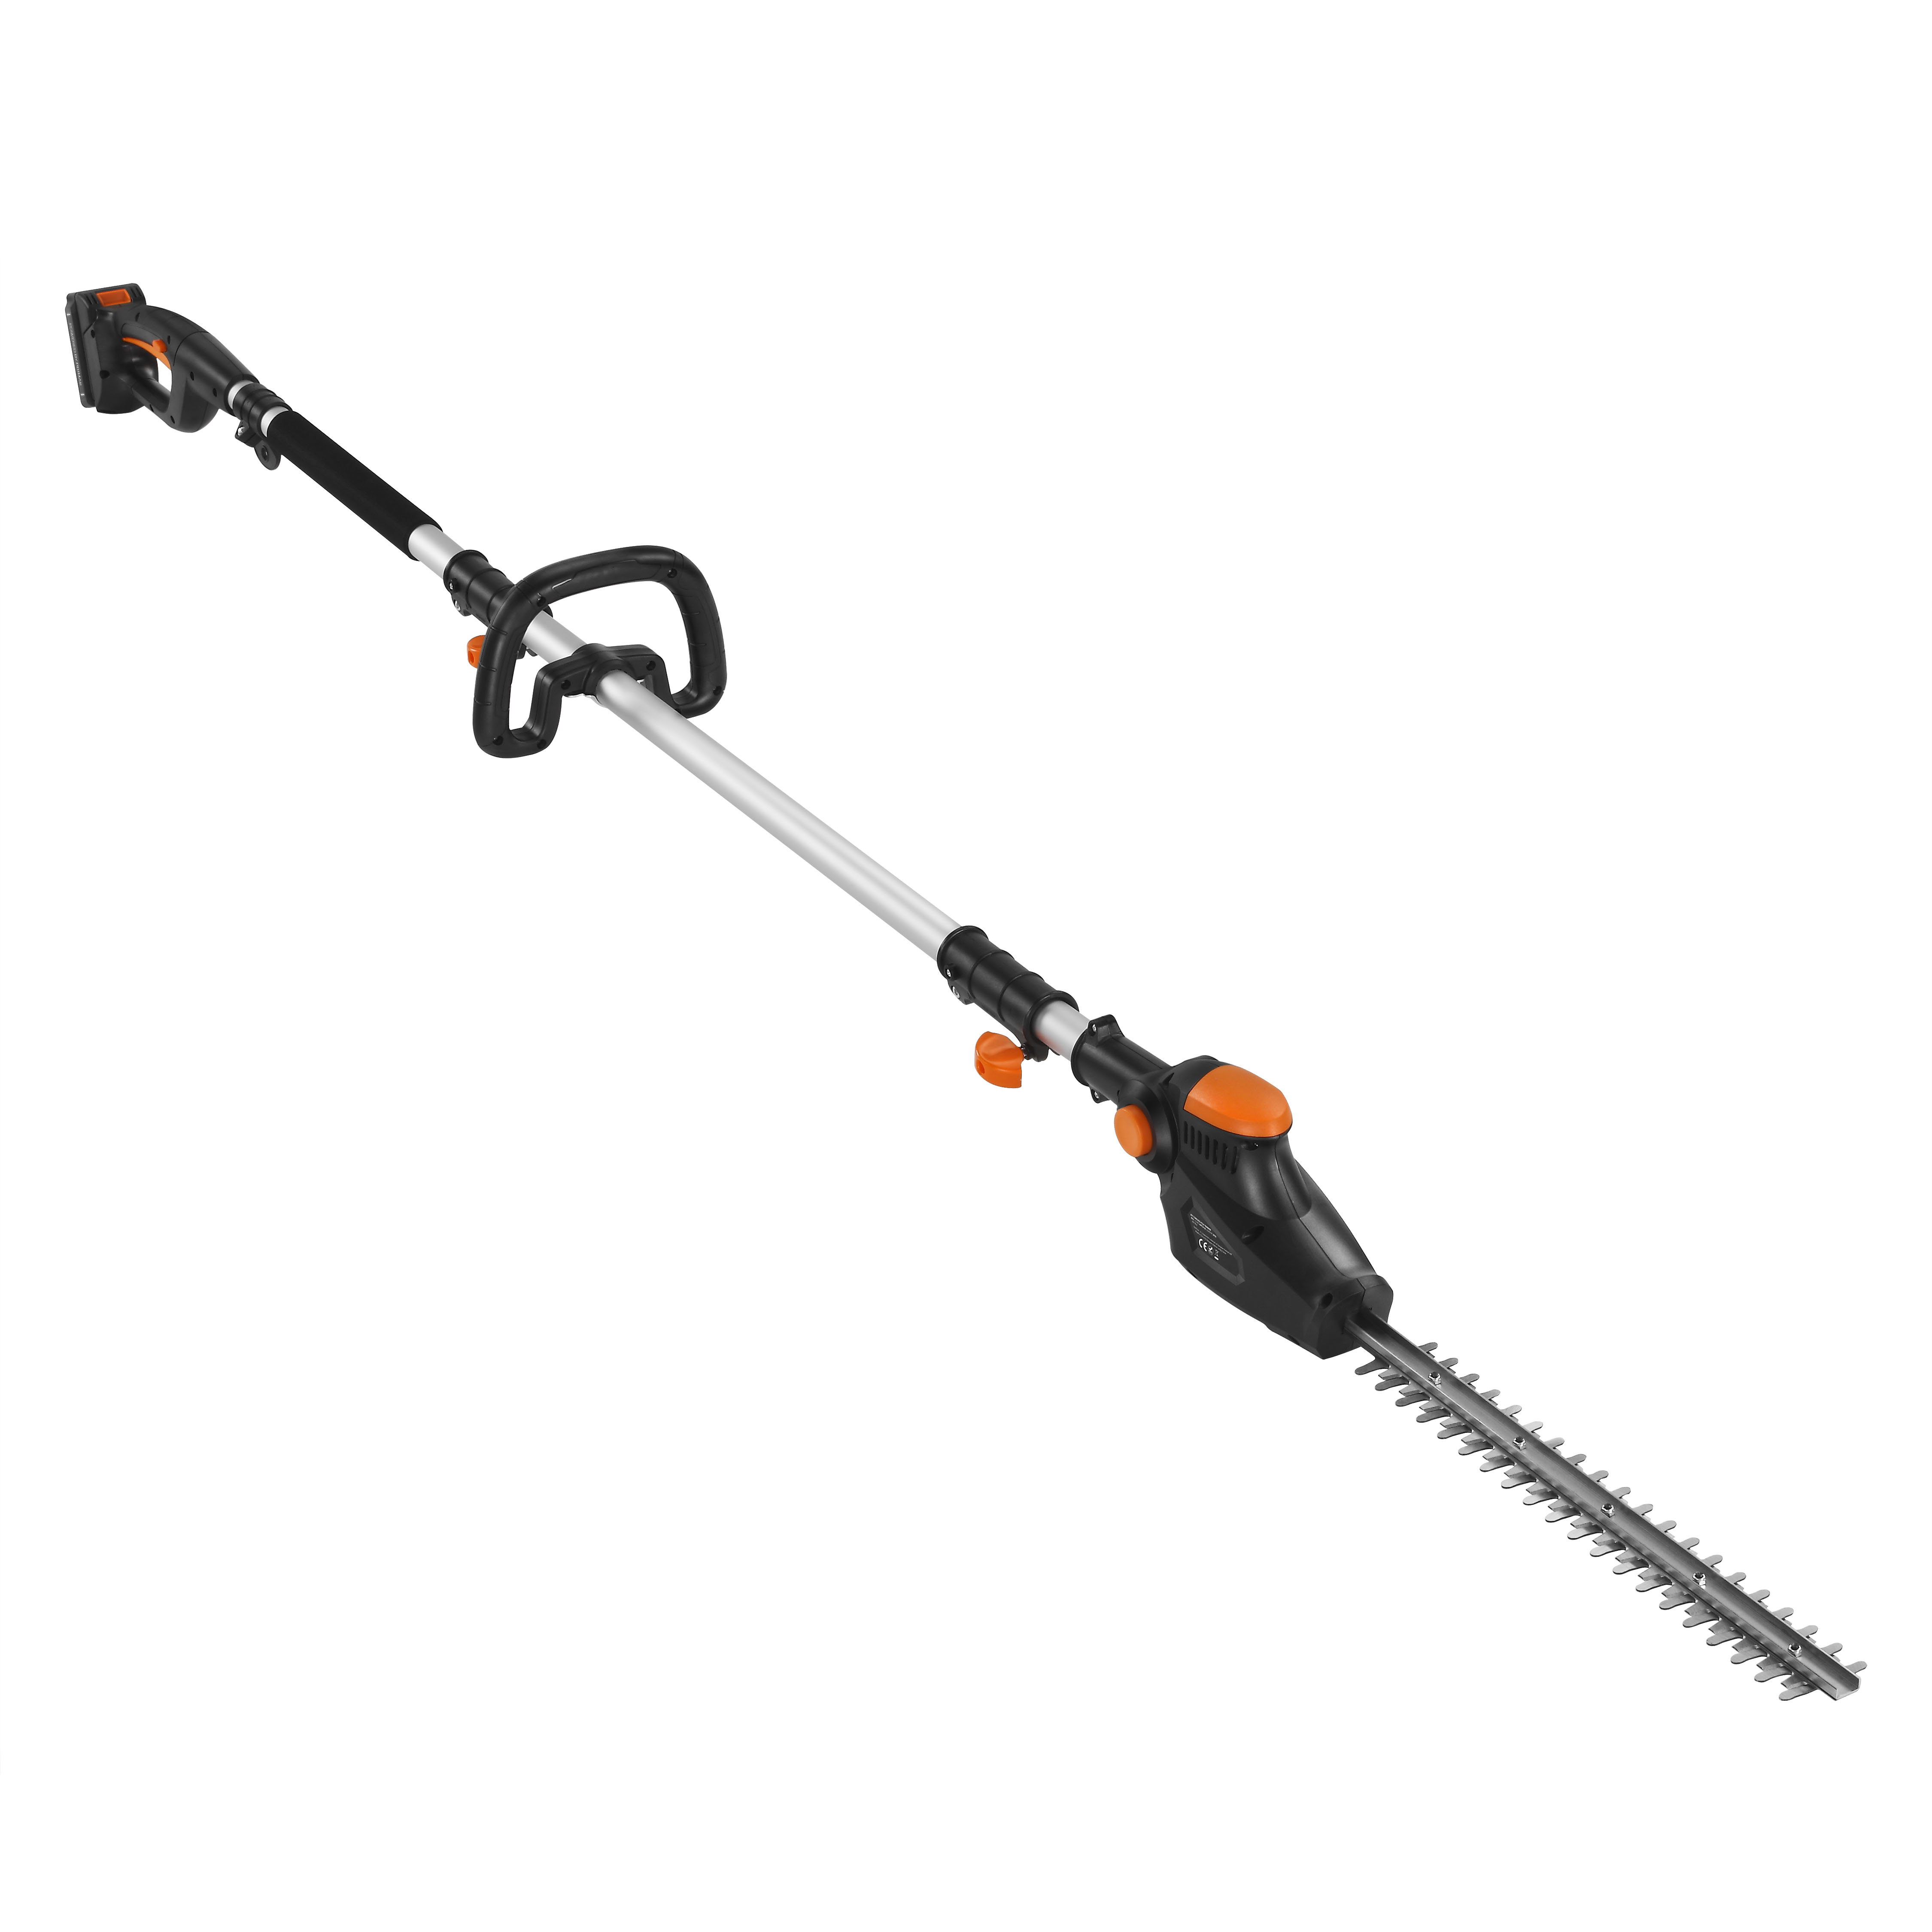 battery pole hedge trimmer